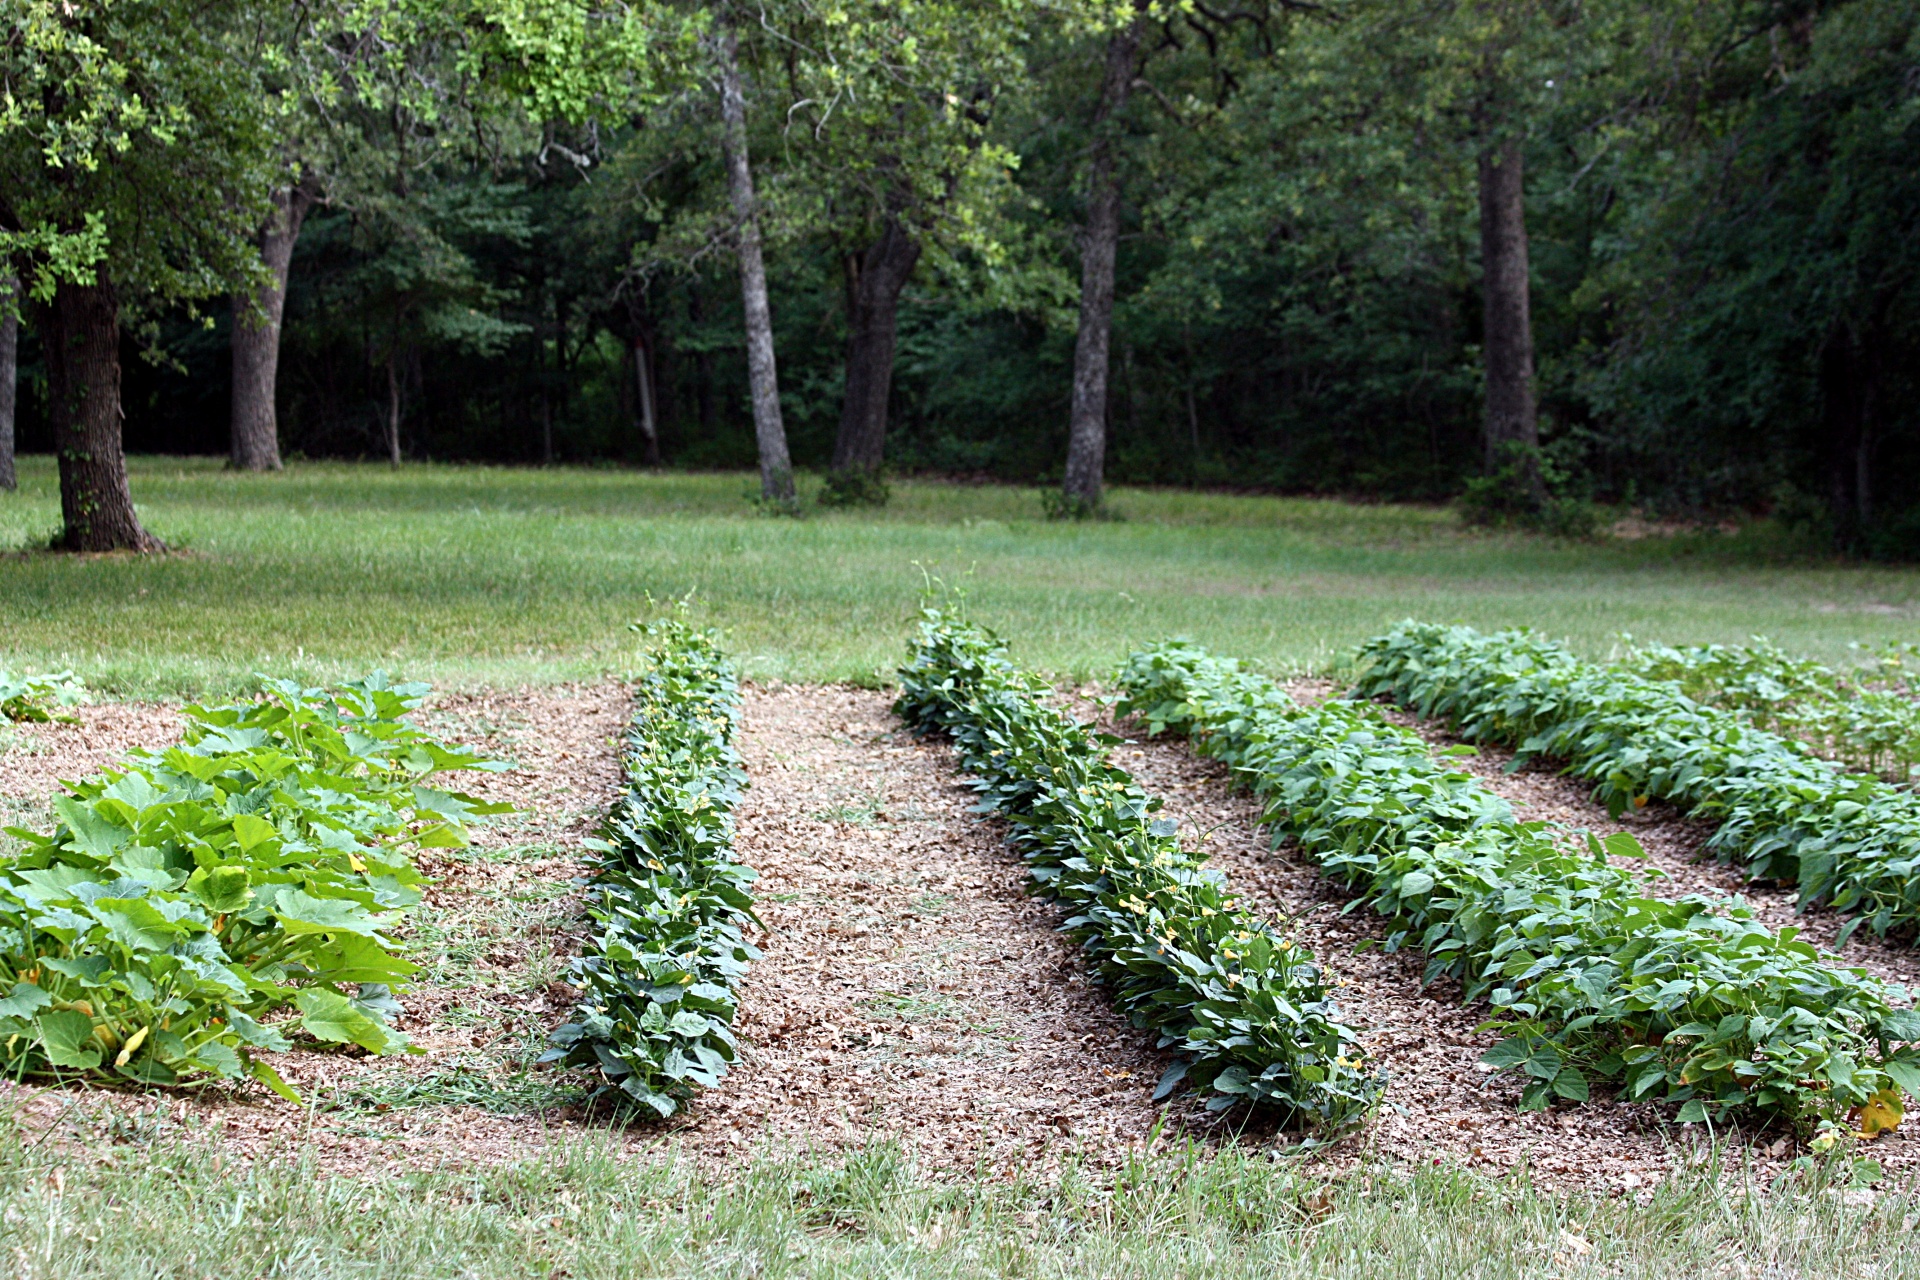 Vegetable garden with rows of green plants growing in wide rows